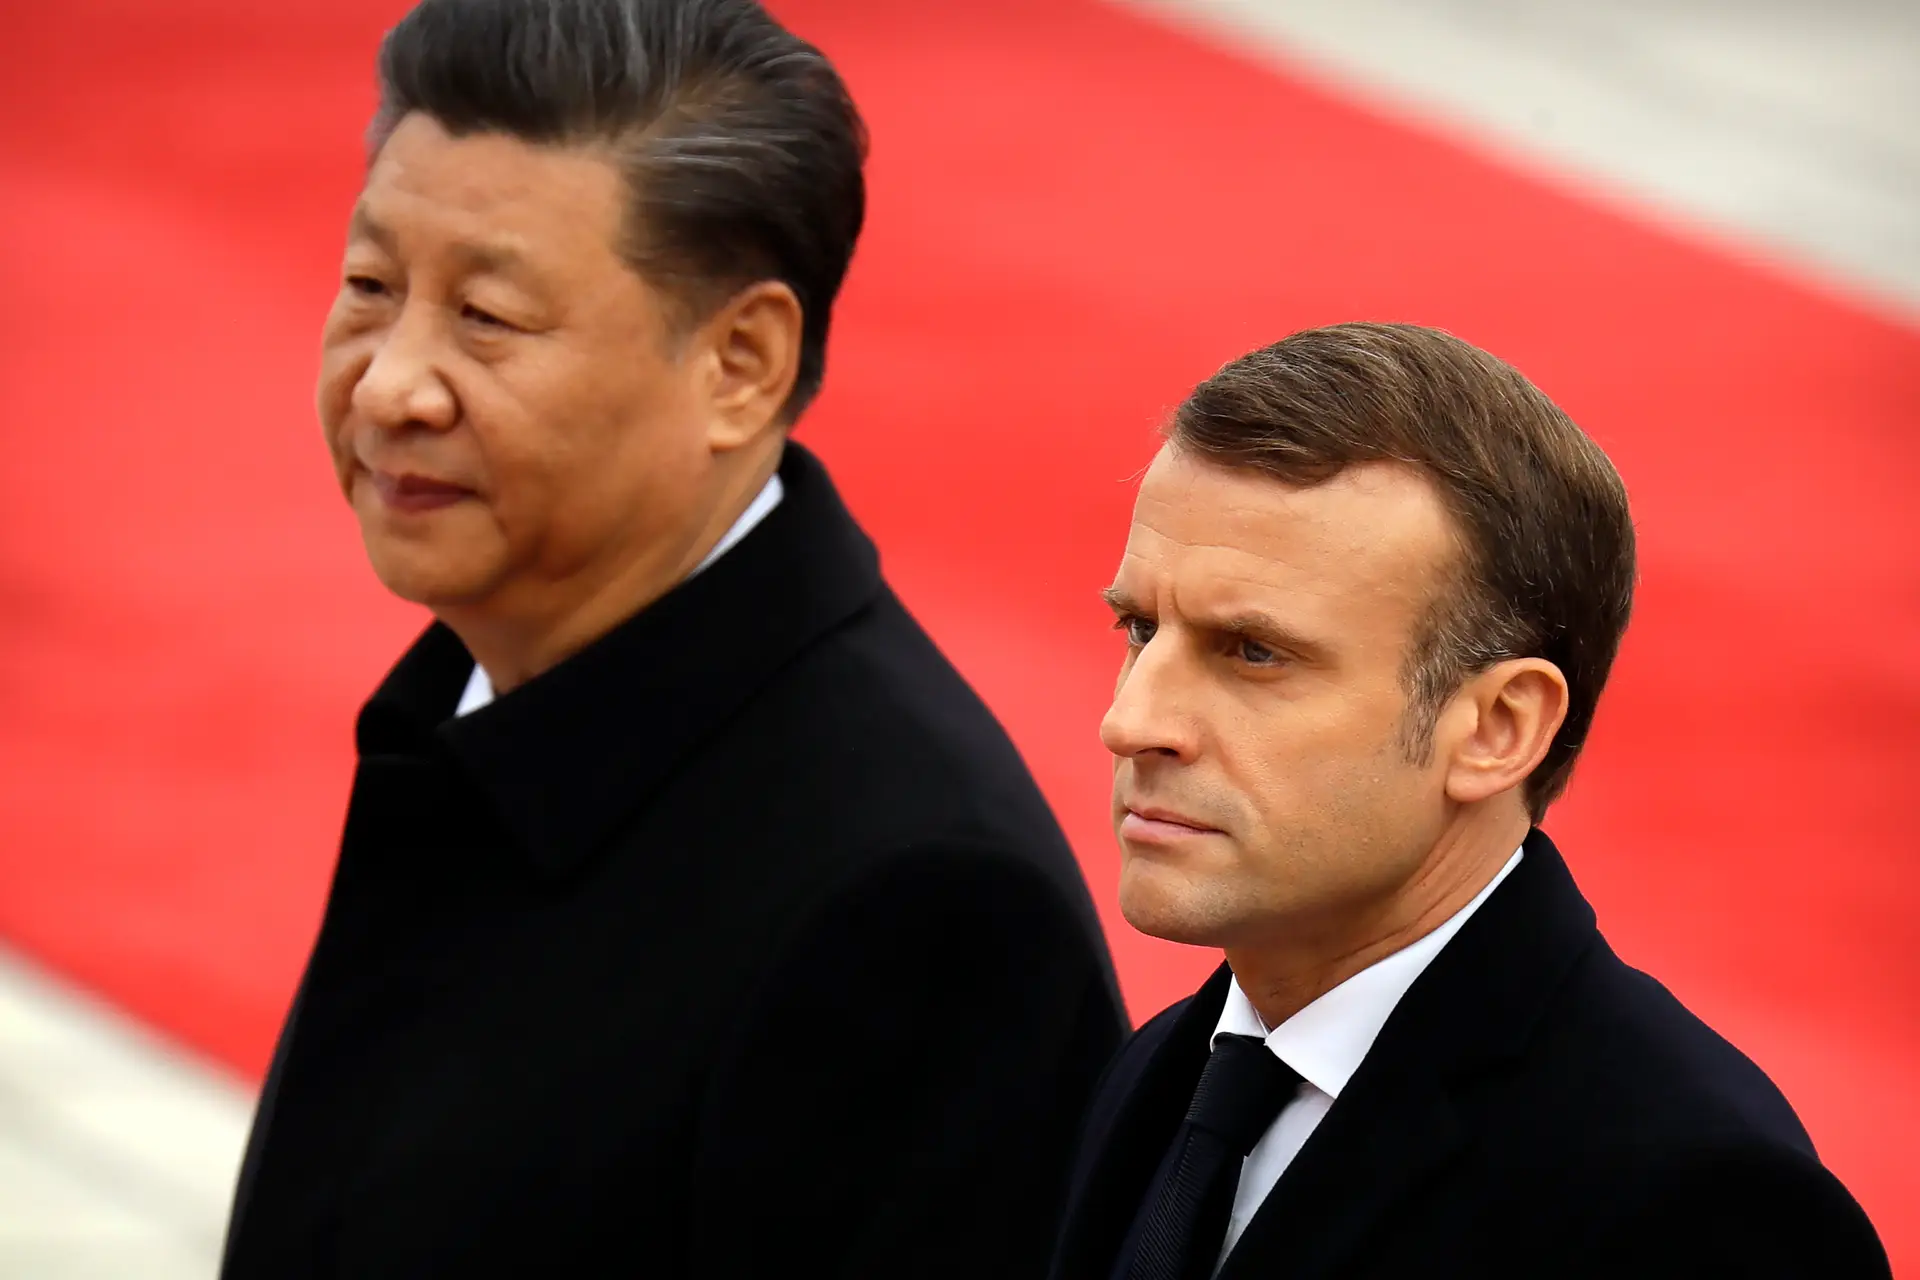 Xi Jinping's meeting with Macron in Paris is very important